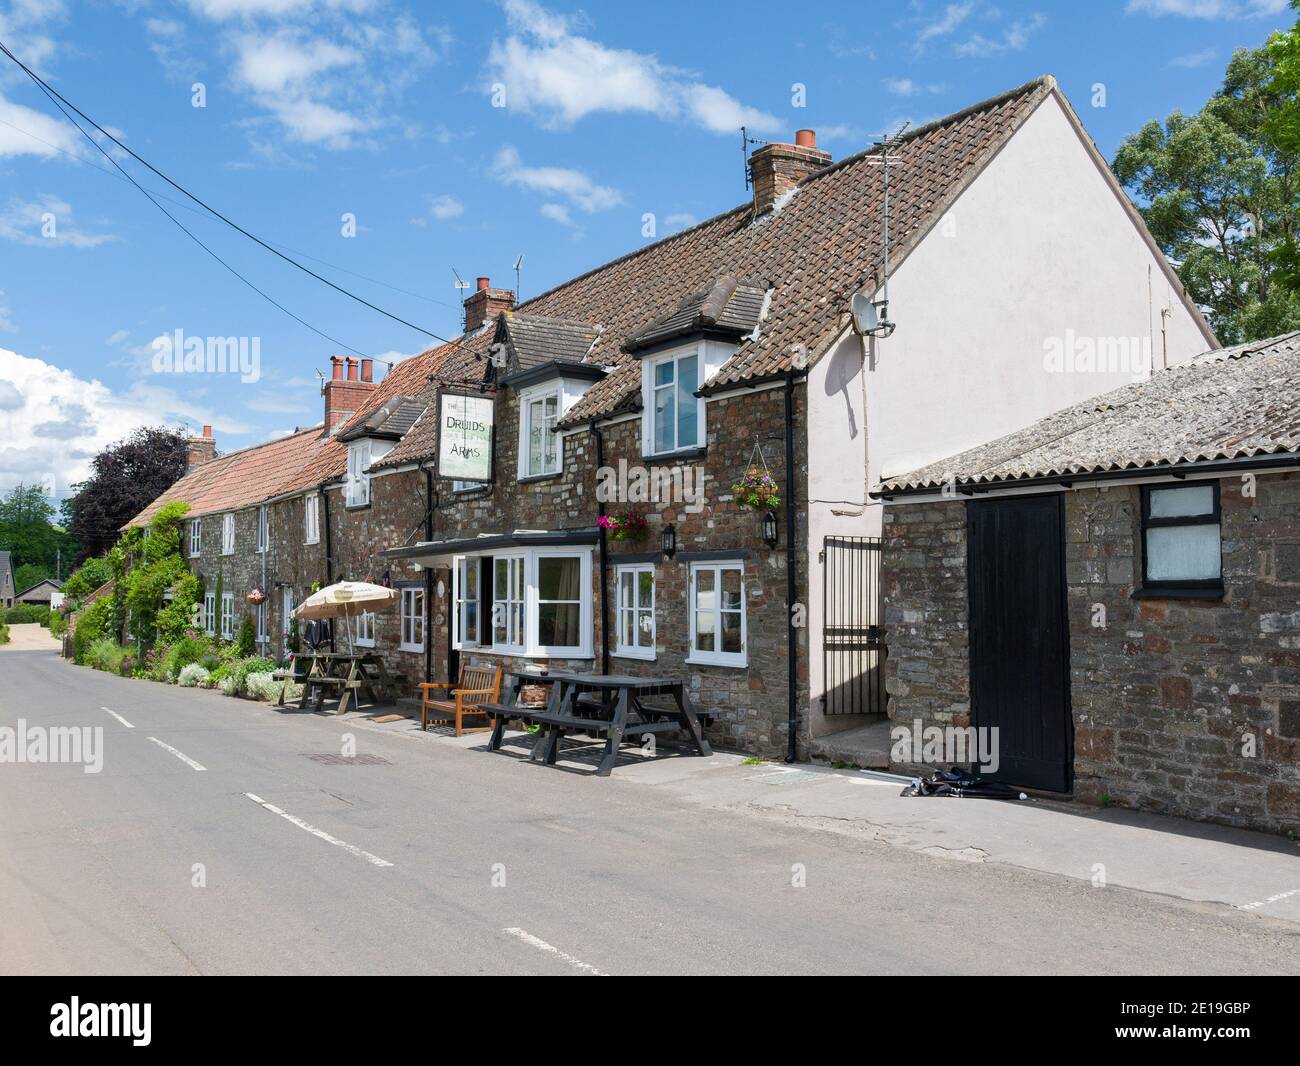 The Druids Arms public house in the village of Stanton Drew, Somerset, England. Stock Photo